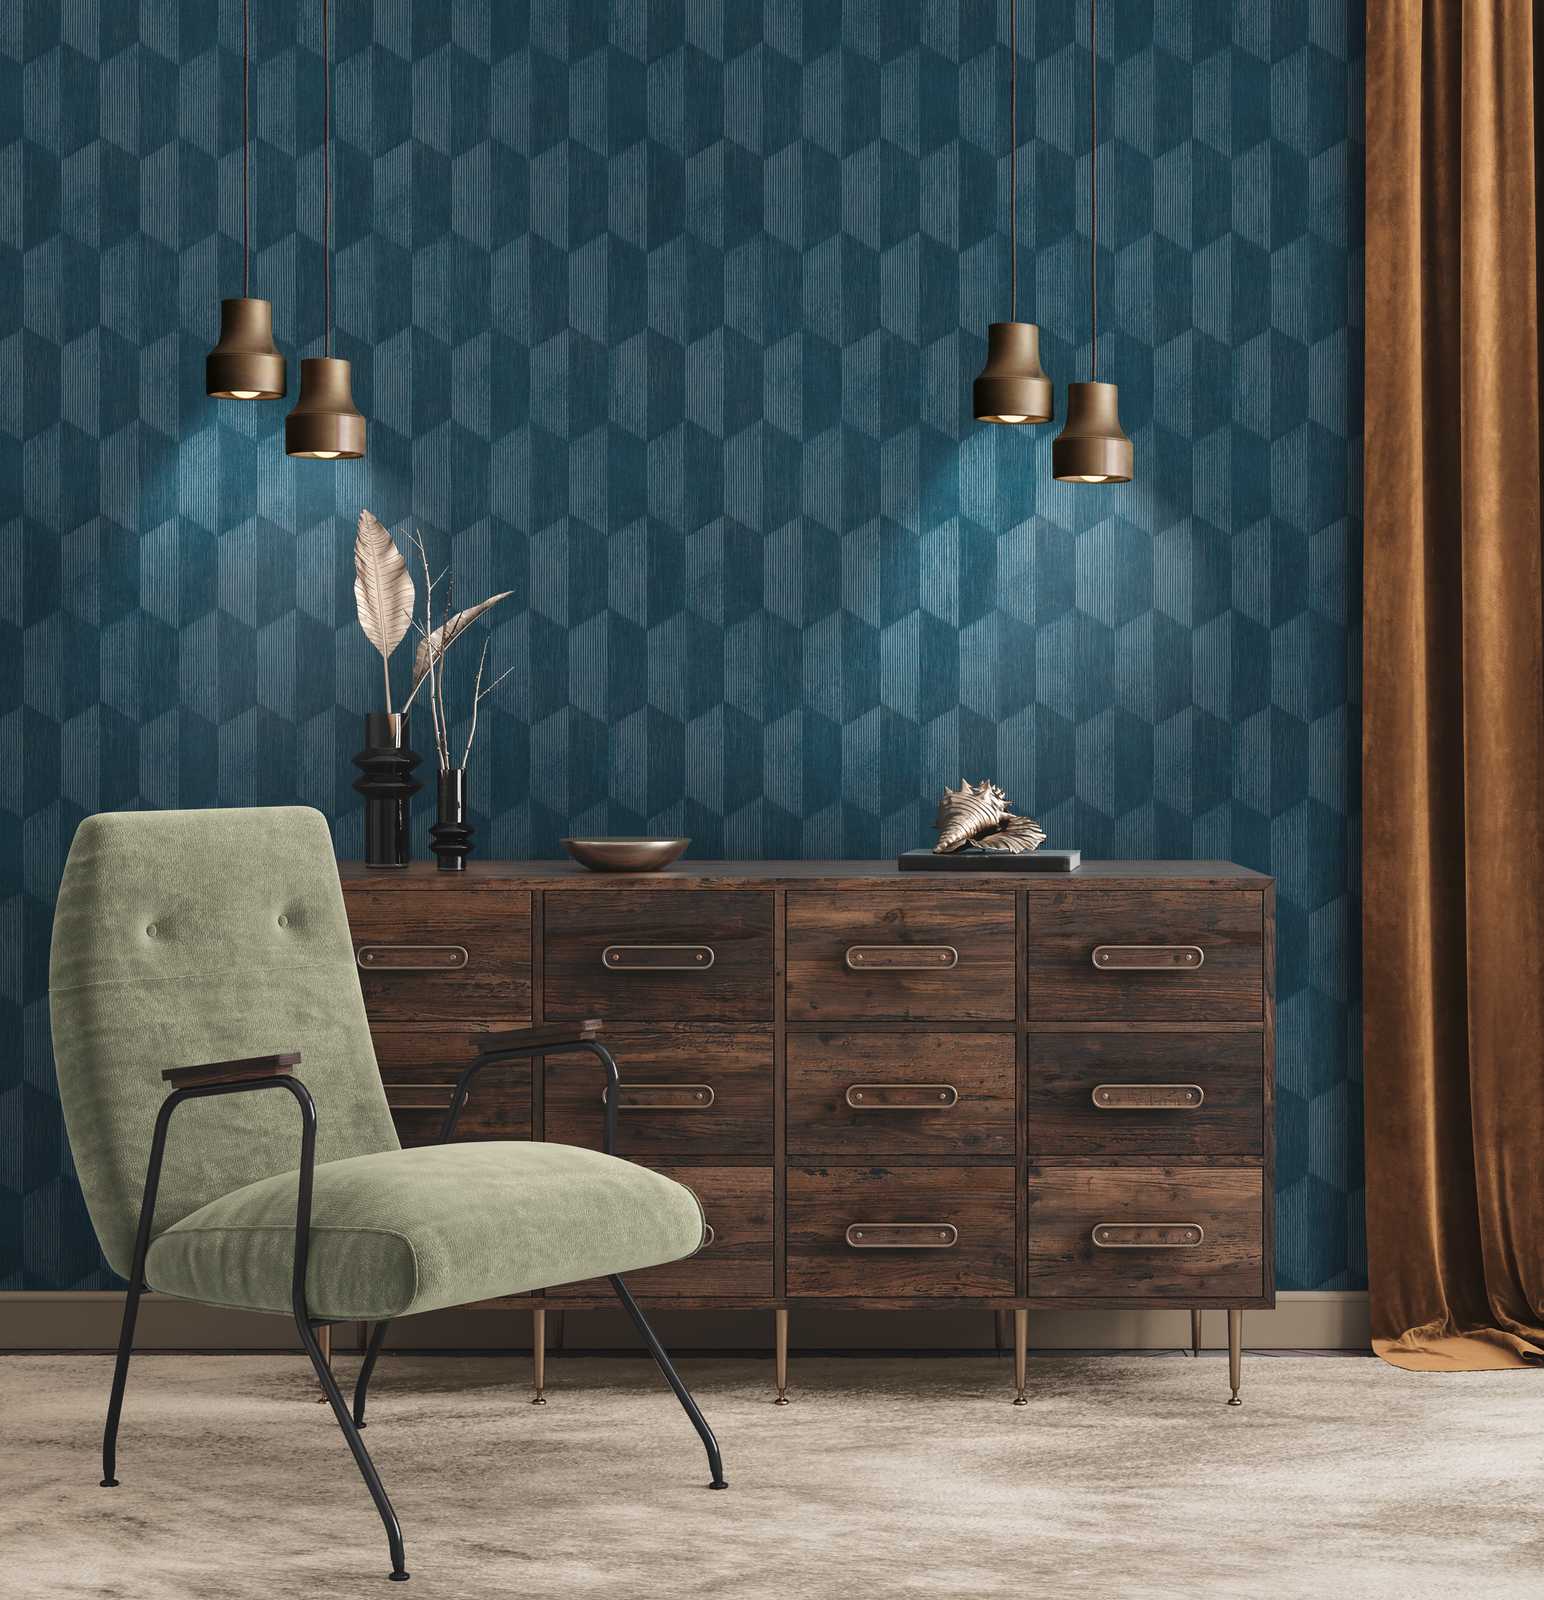             Wallpaper 3D pattern with graphic facets design - blue
        